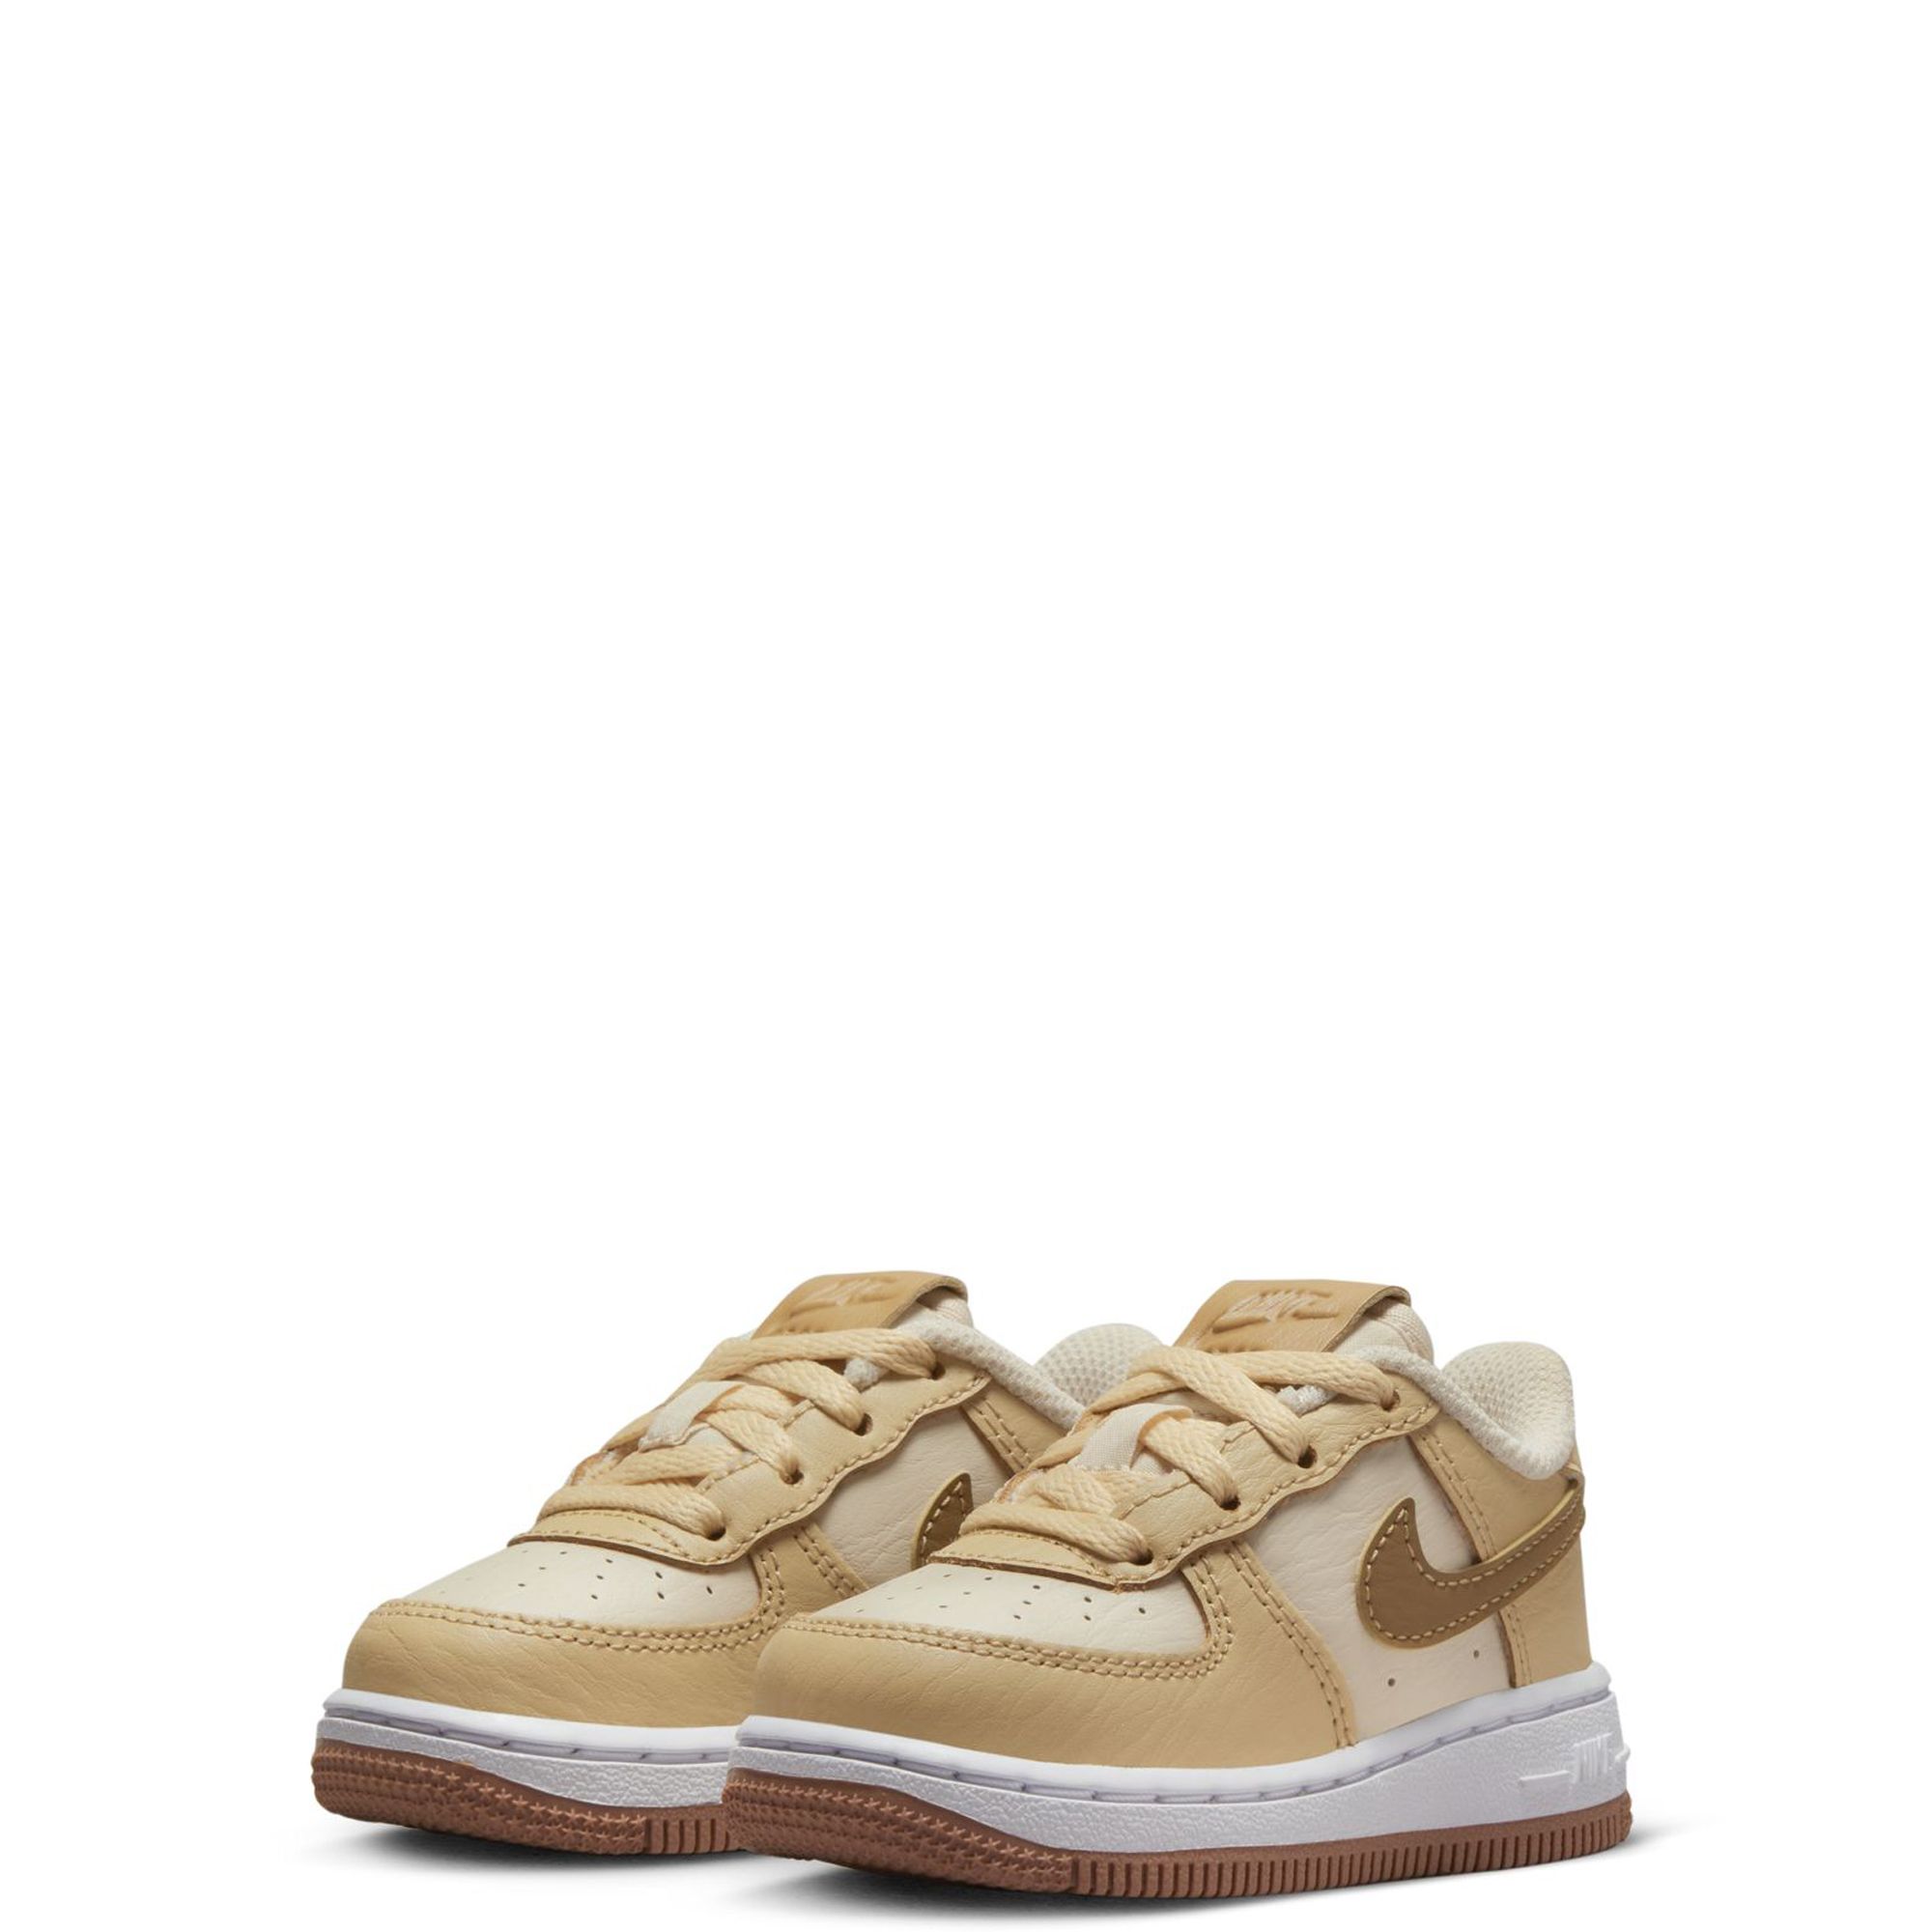 Buy Nike Air Force 1 '07 LV8 Men's Shoes, Pearl White/Ale Brown-sesame, 14  at